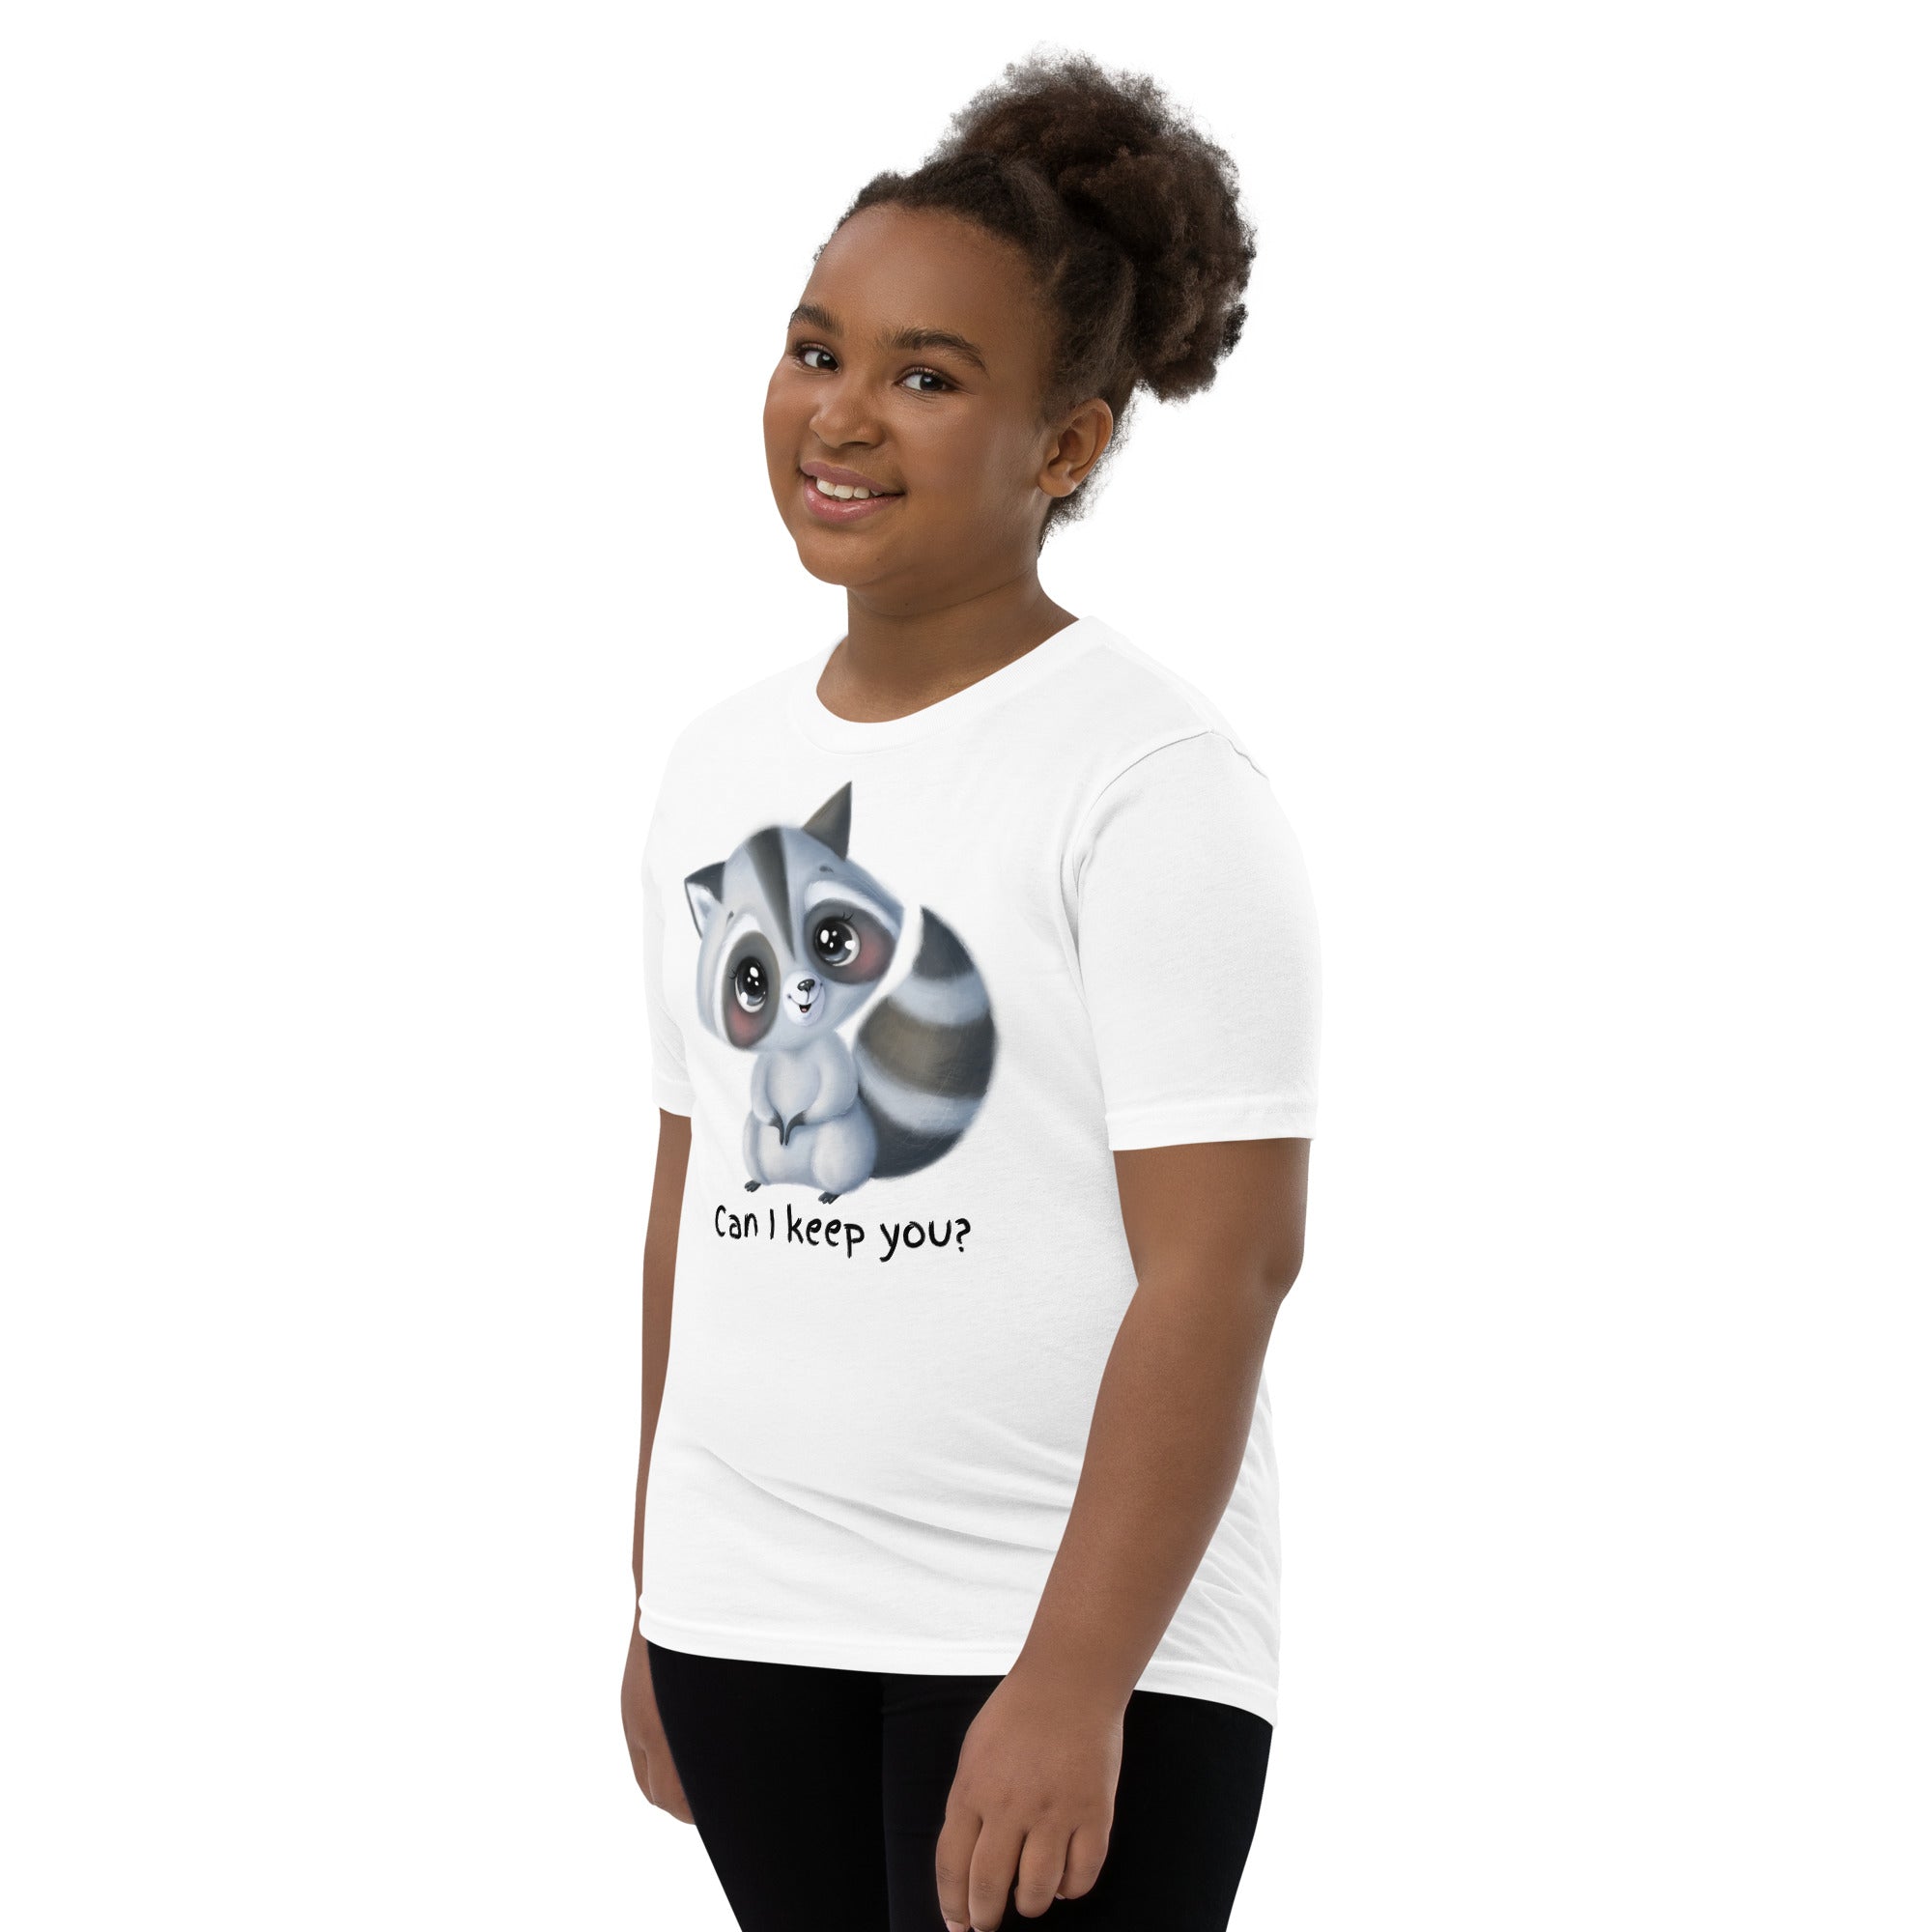 Can I Keep You? - Youth Short Sleeve T-Shirt